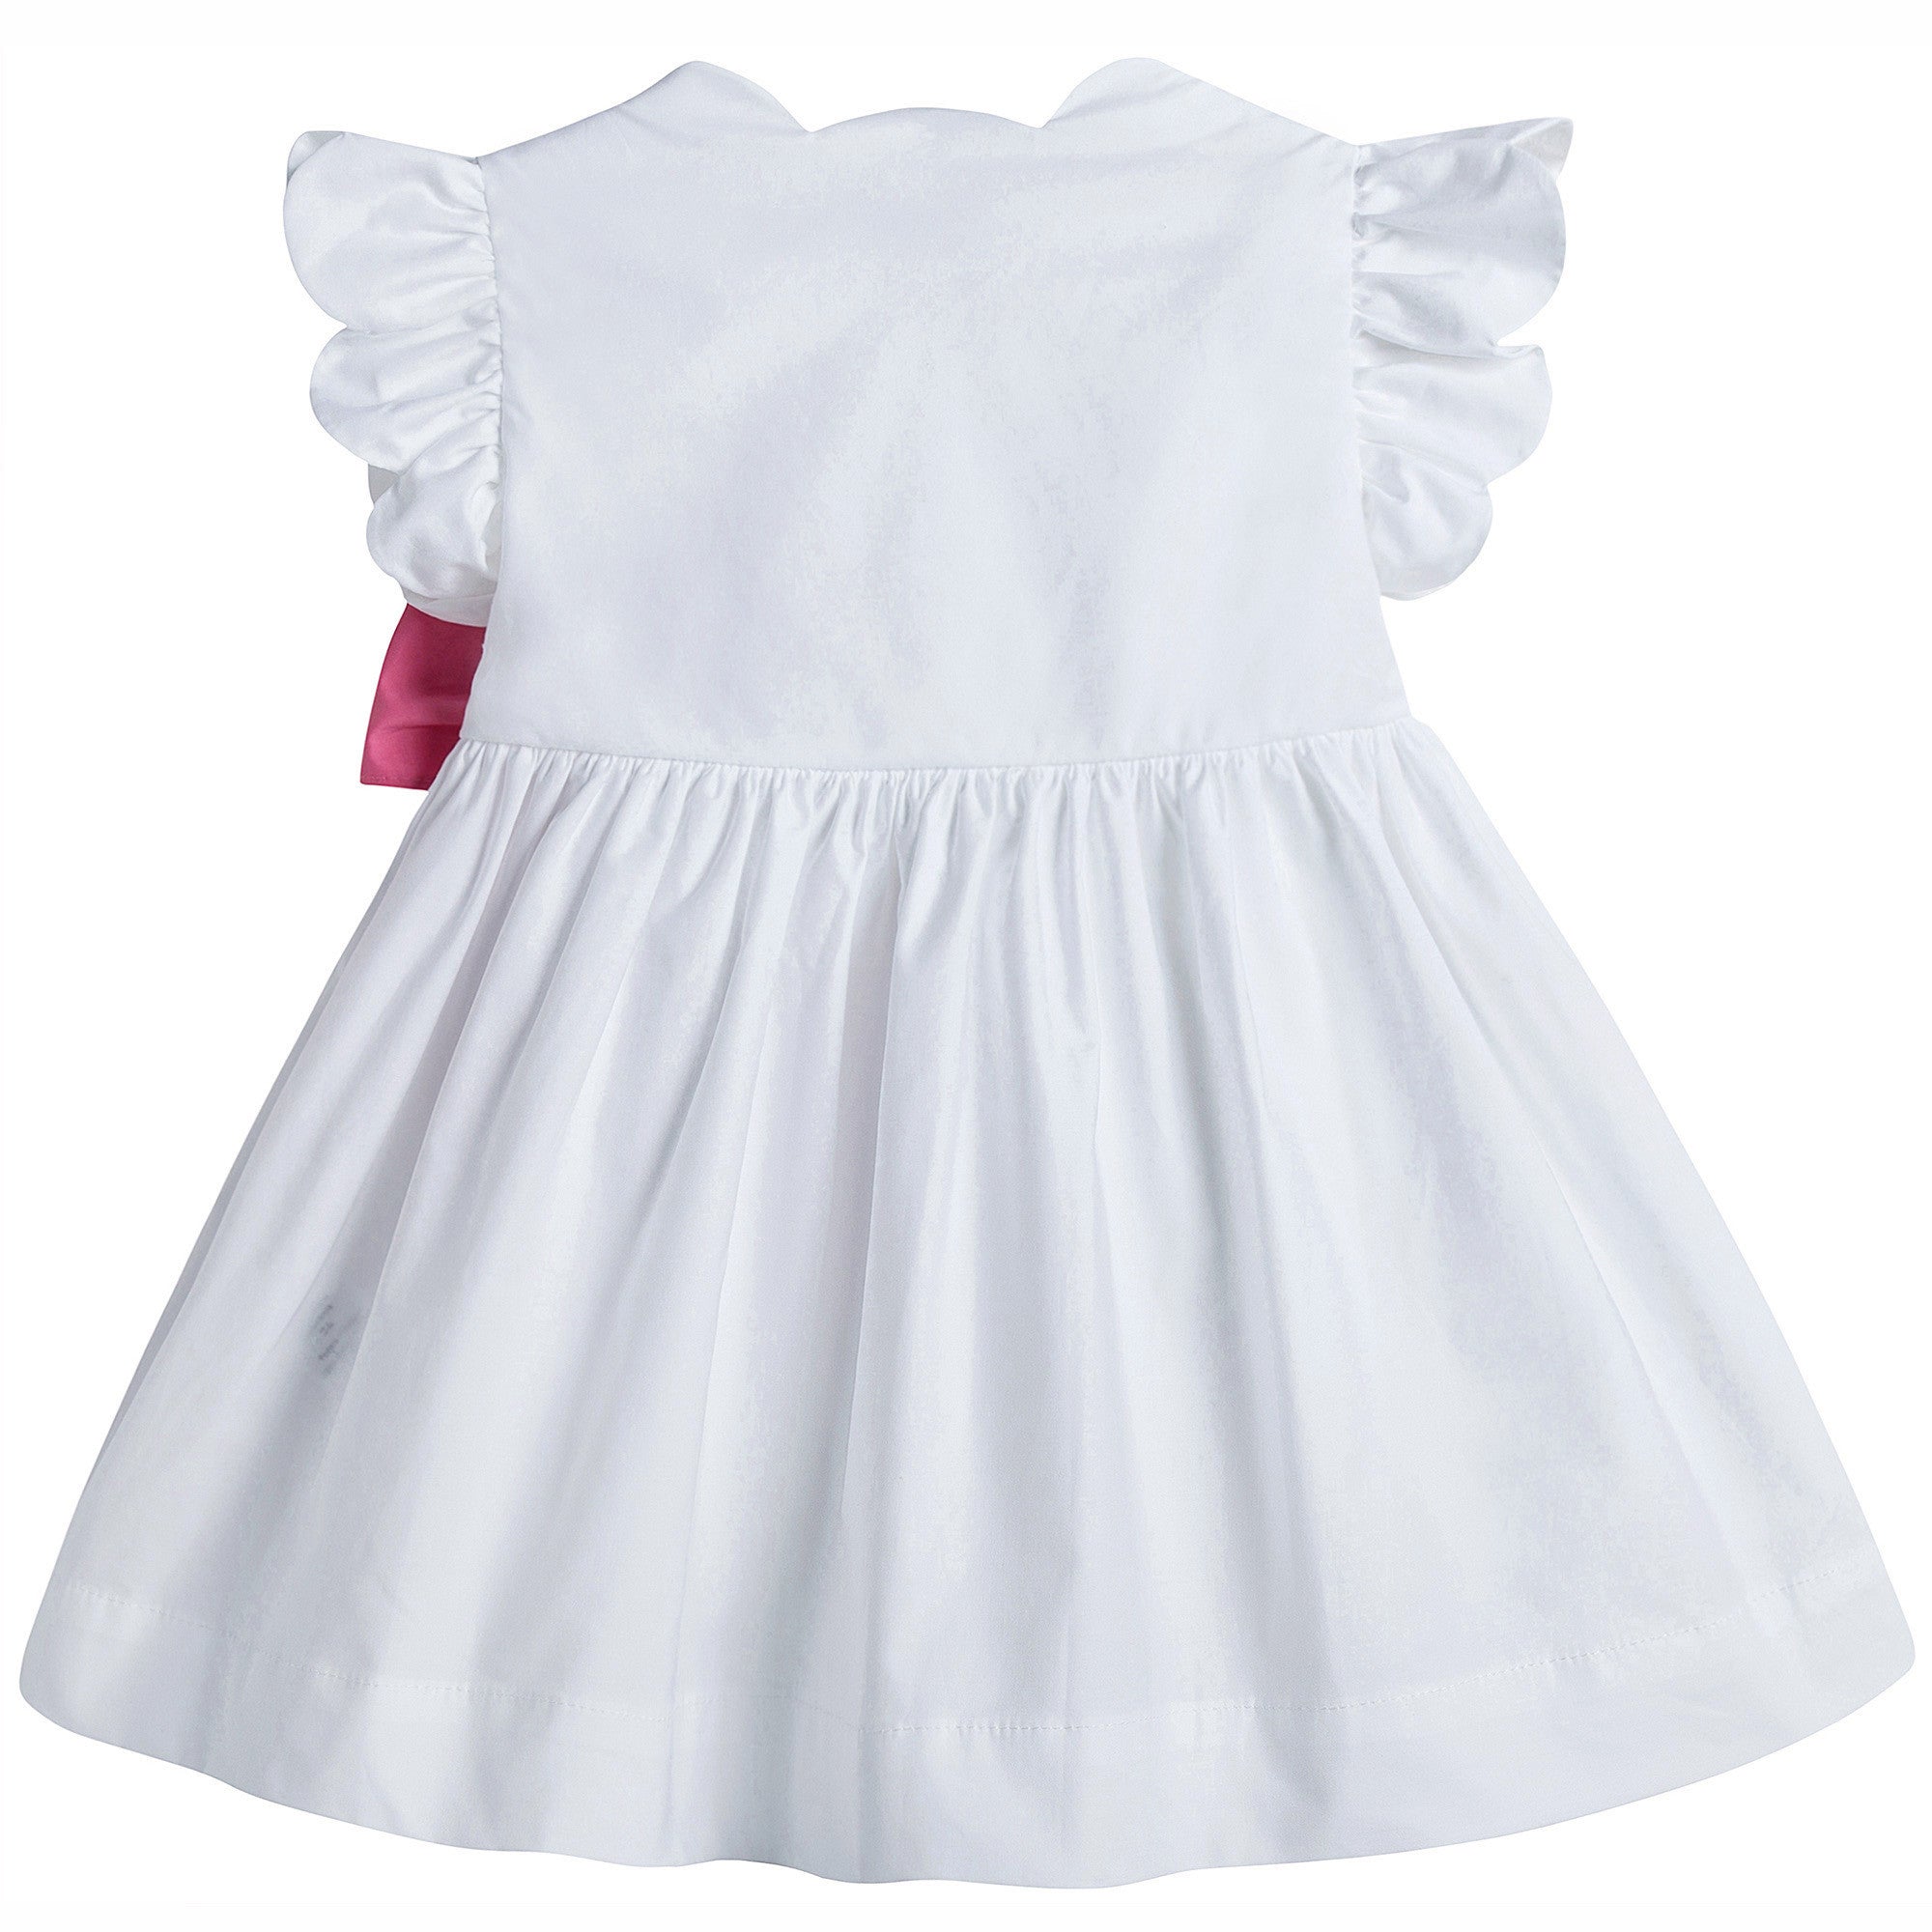 Girls White Cotton Dress with Pink Bow - CÉMAROSE | Children's Fashion Store - 2